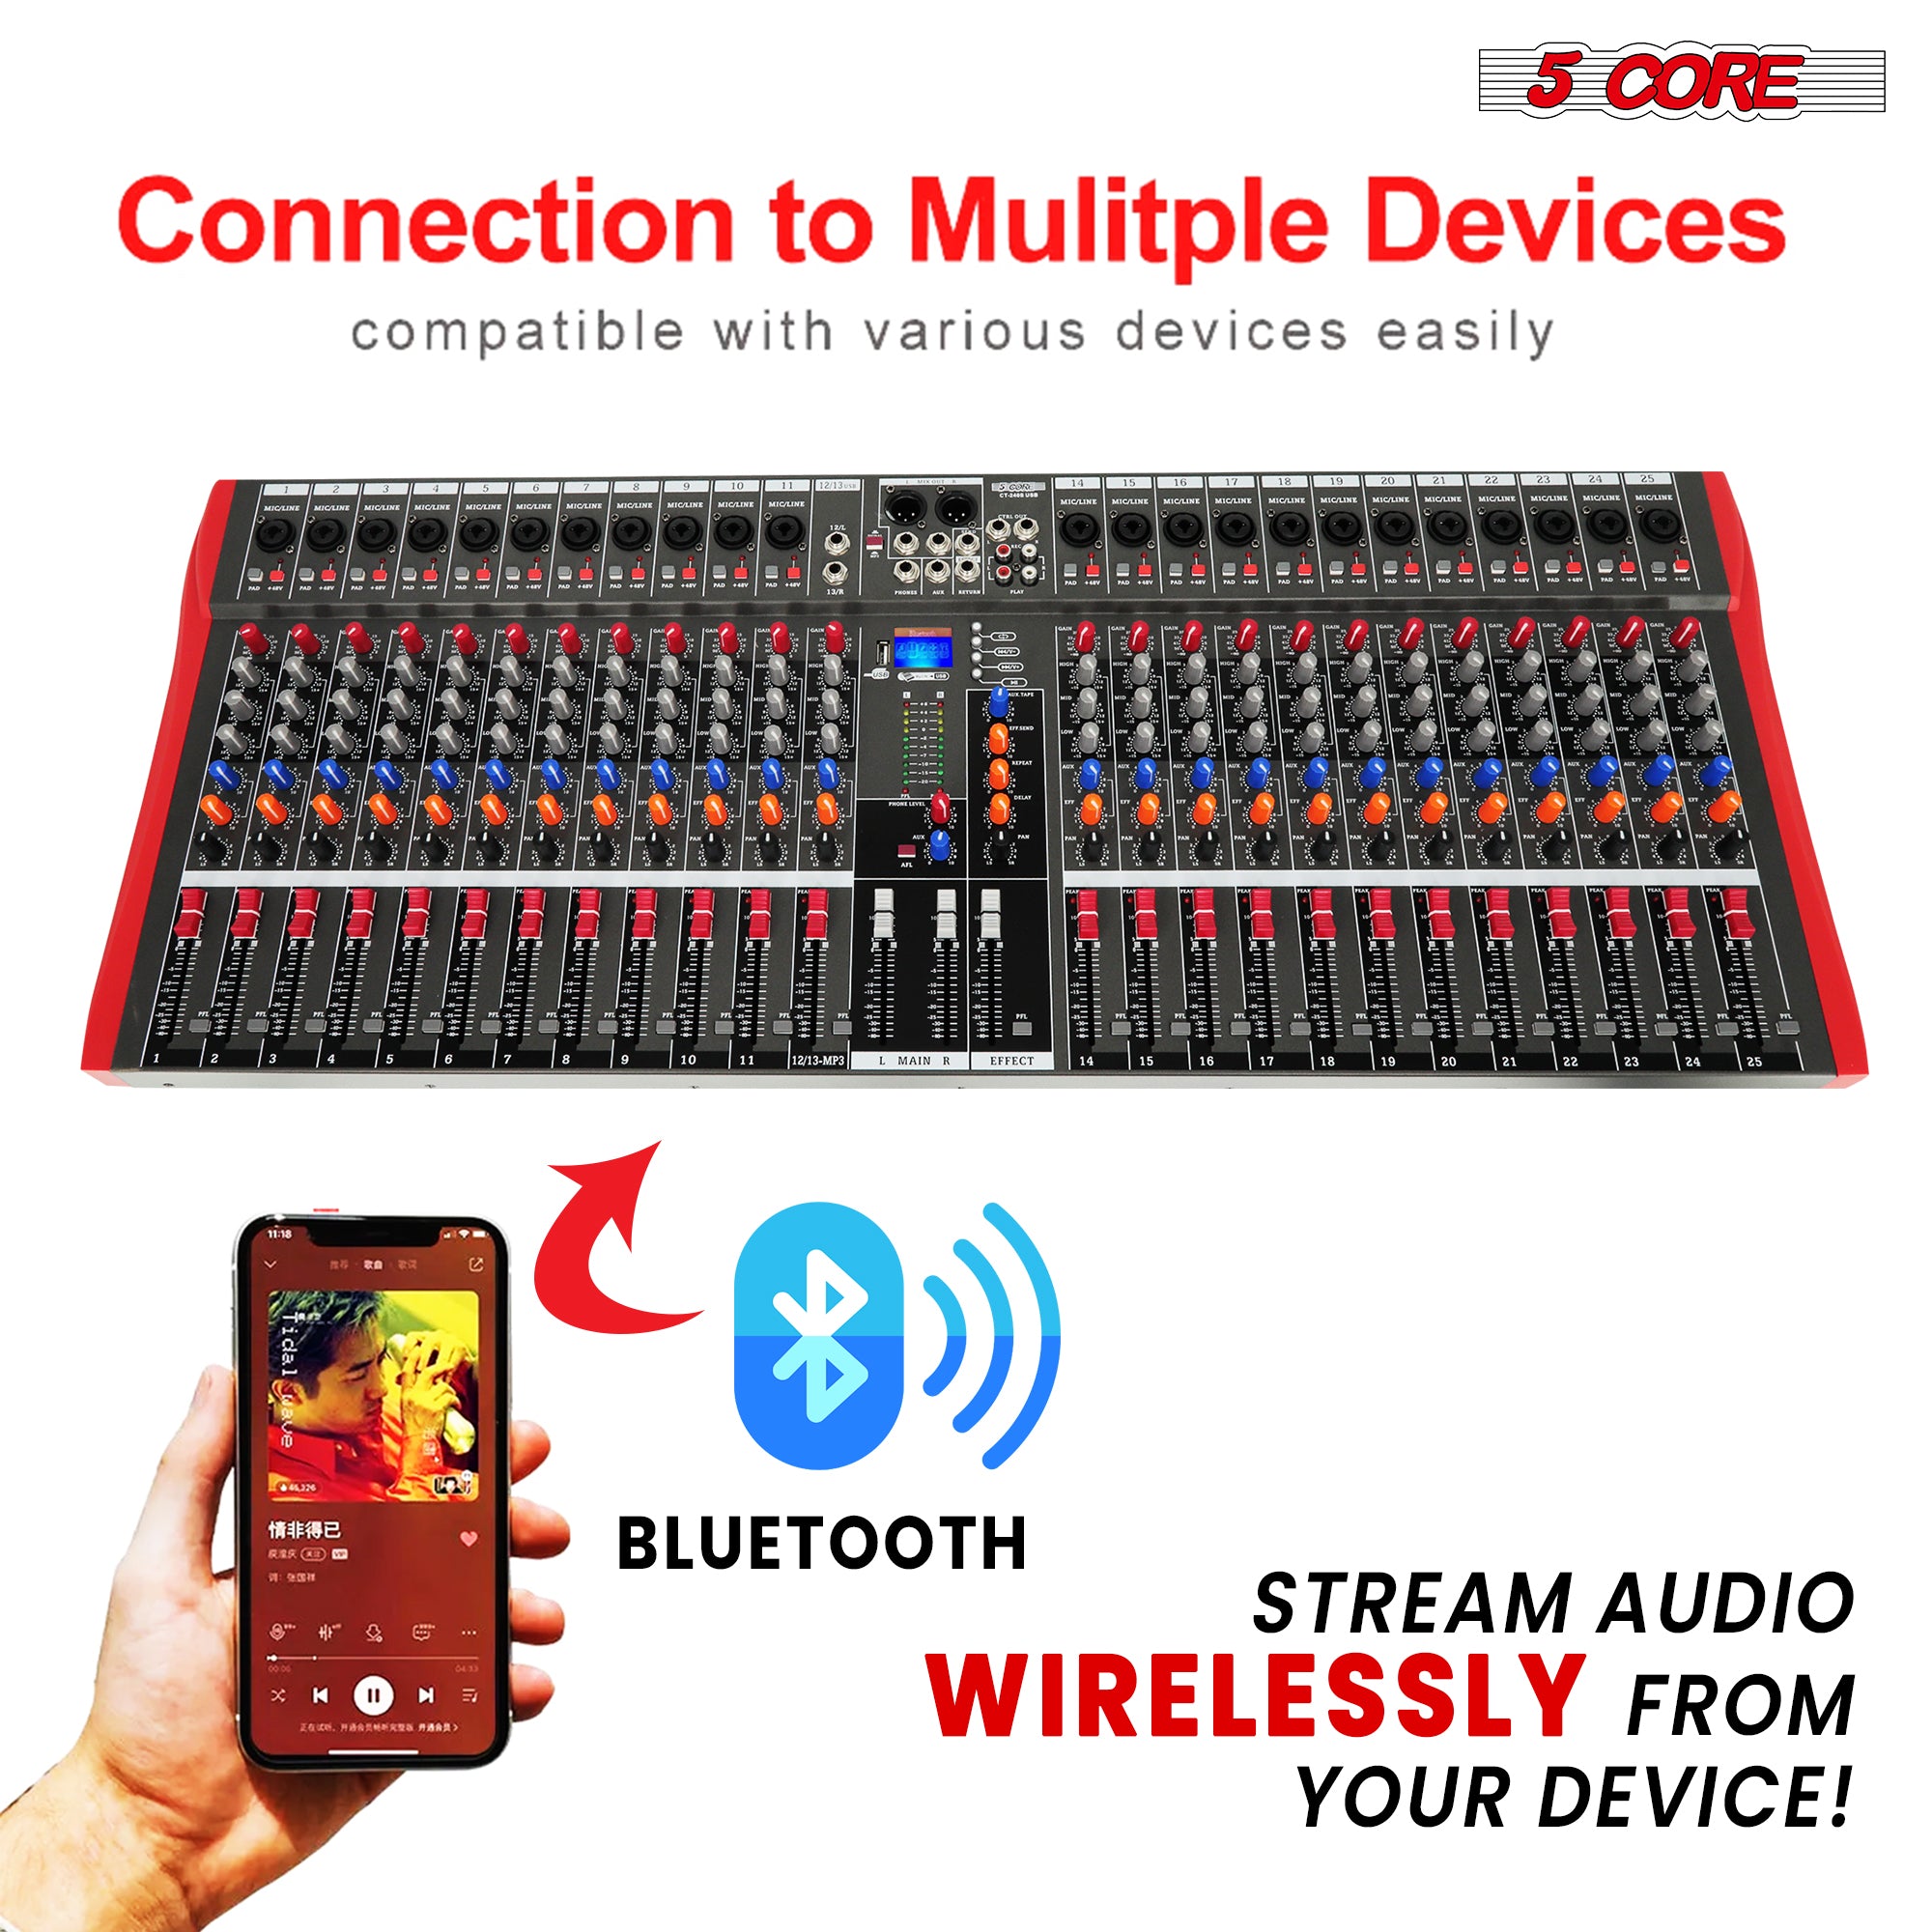 Versatile DJ controller with Bluetooth and USB connectivity for seamless integration.